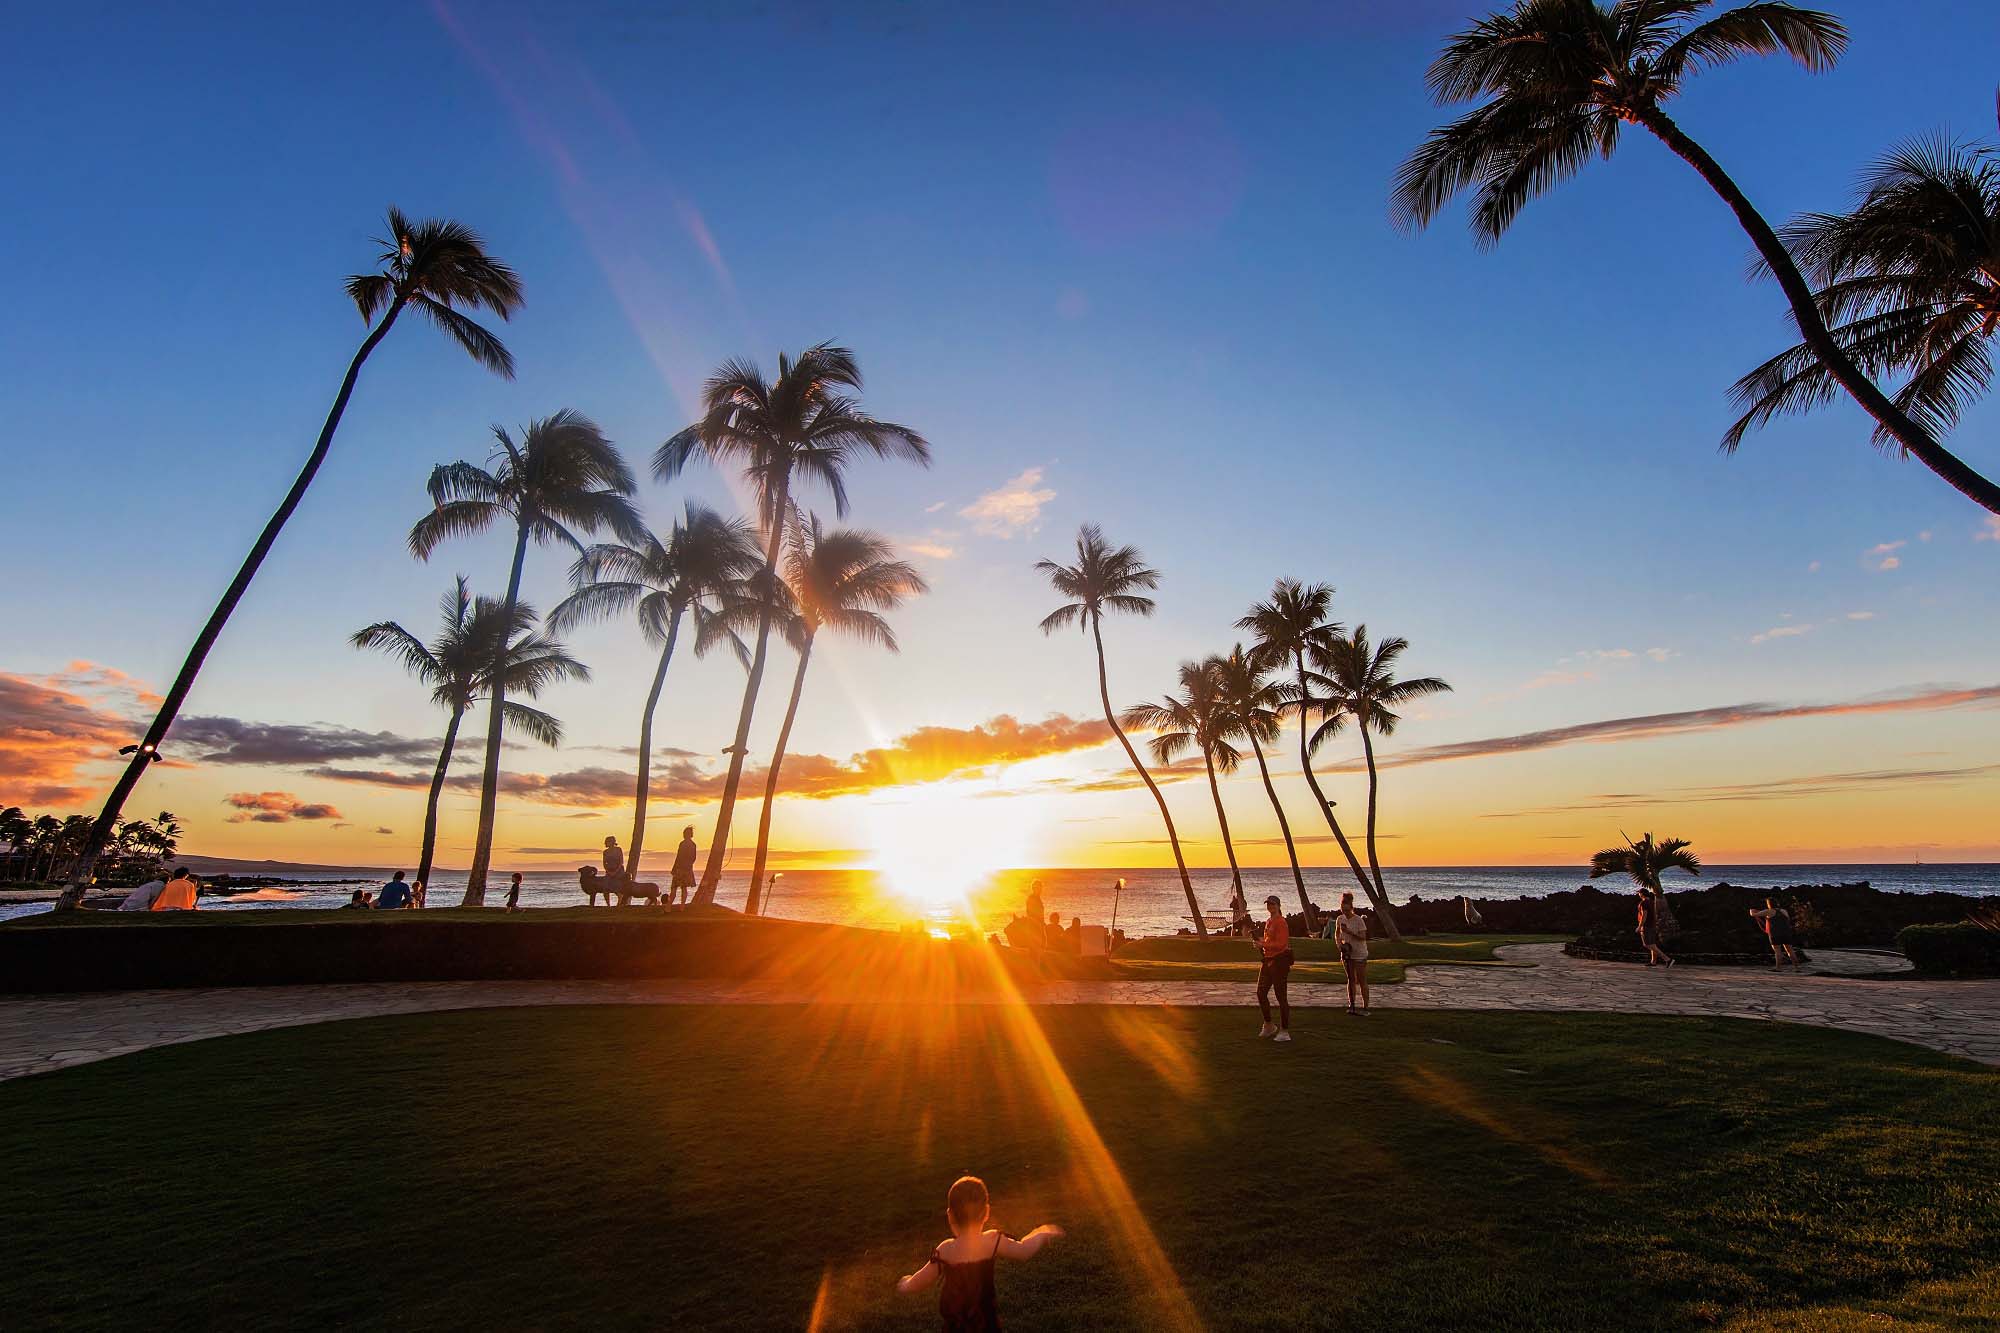 Hilton Hawaiian Village: A Tropical Paradise for Your Next HGV Vacation - A  Timeshare Broker, Inc.